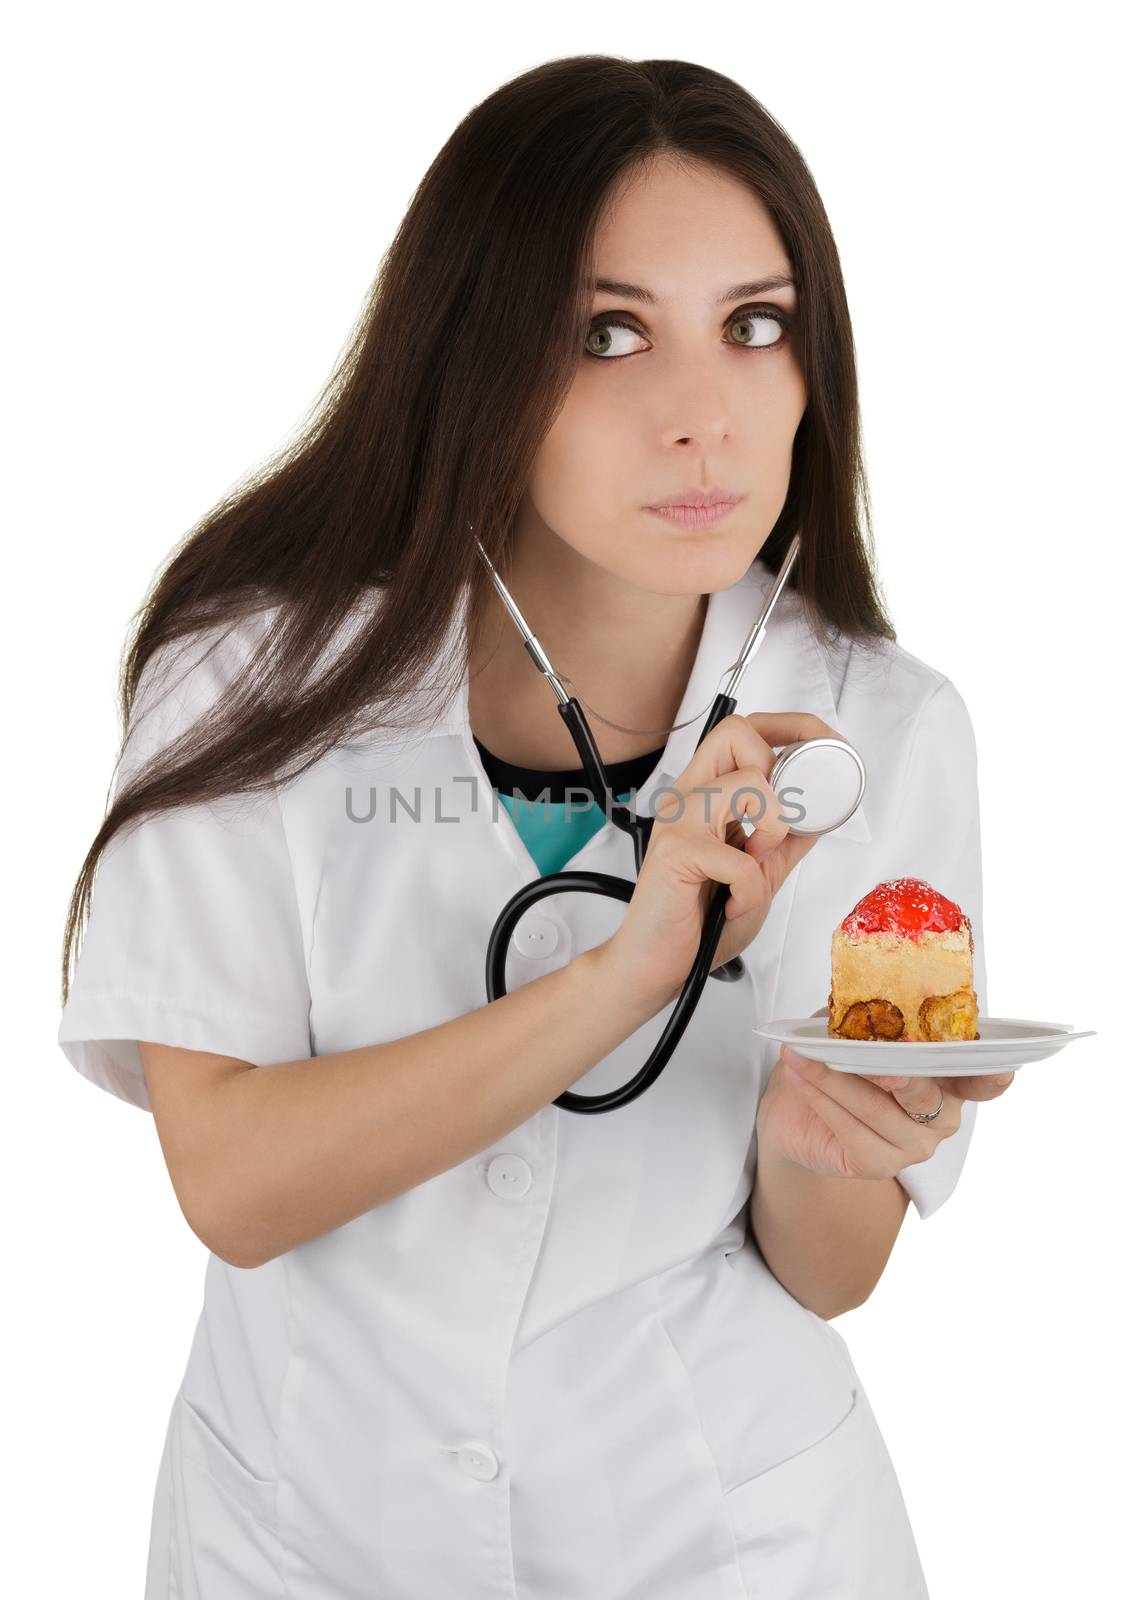 Woman nutritionist checking how healthy a piece of cake is, isolated on white background.